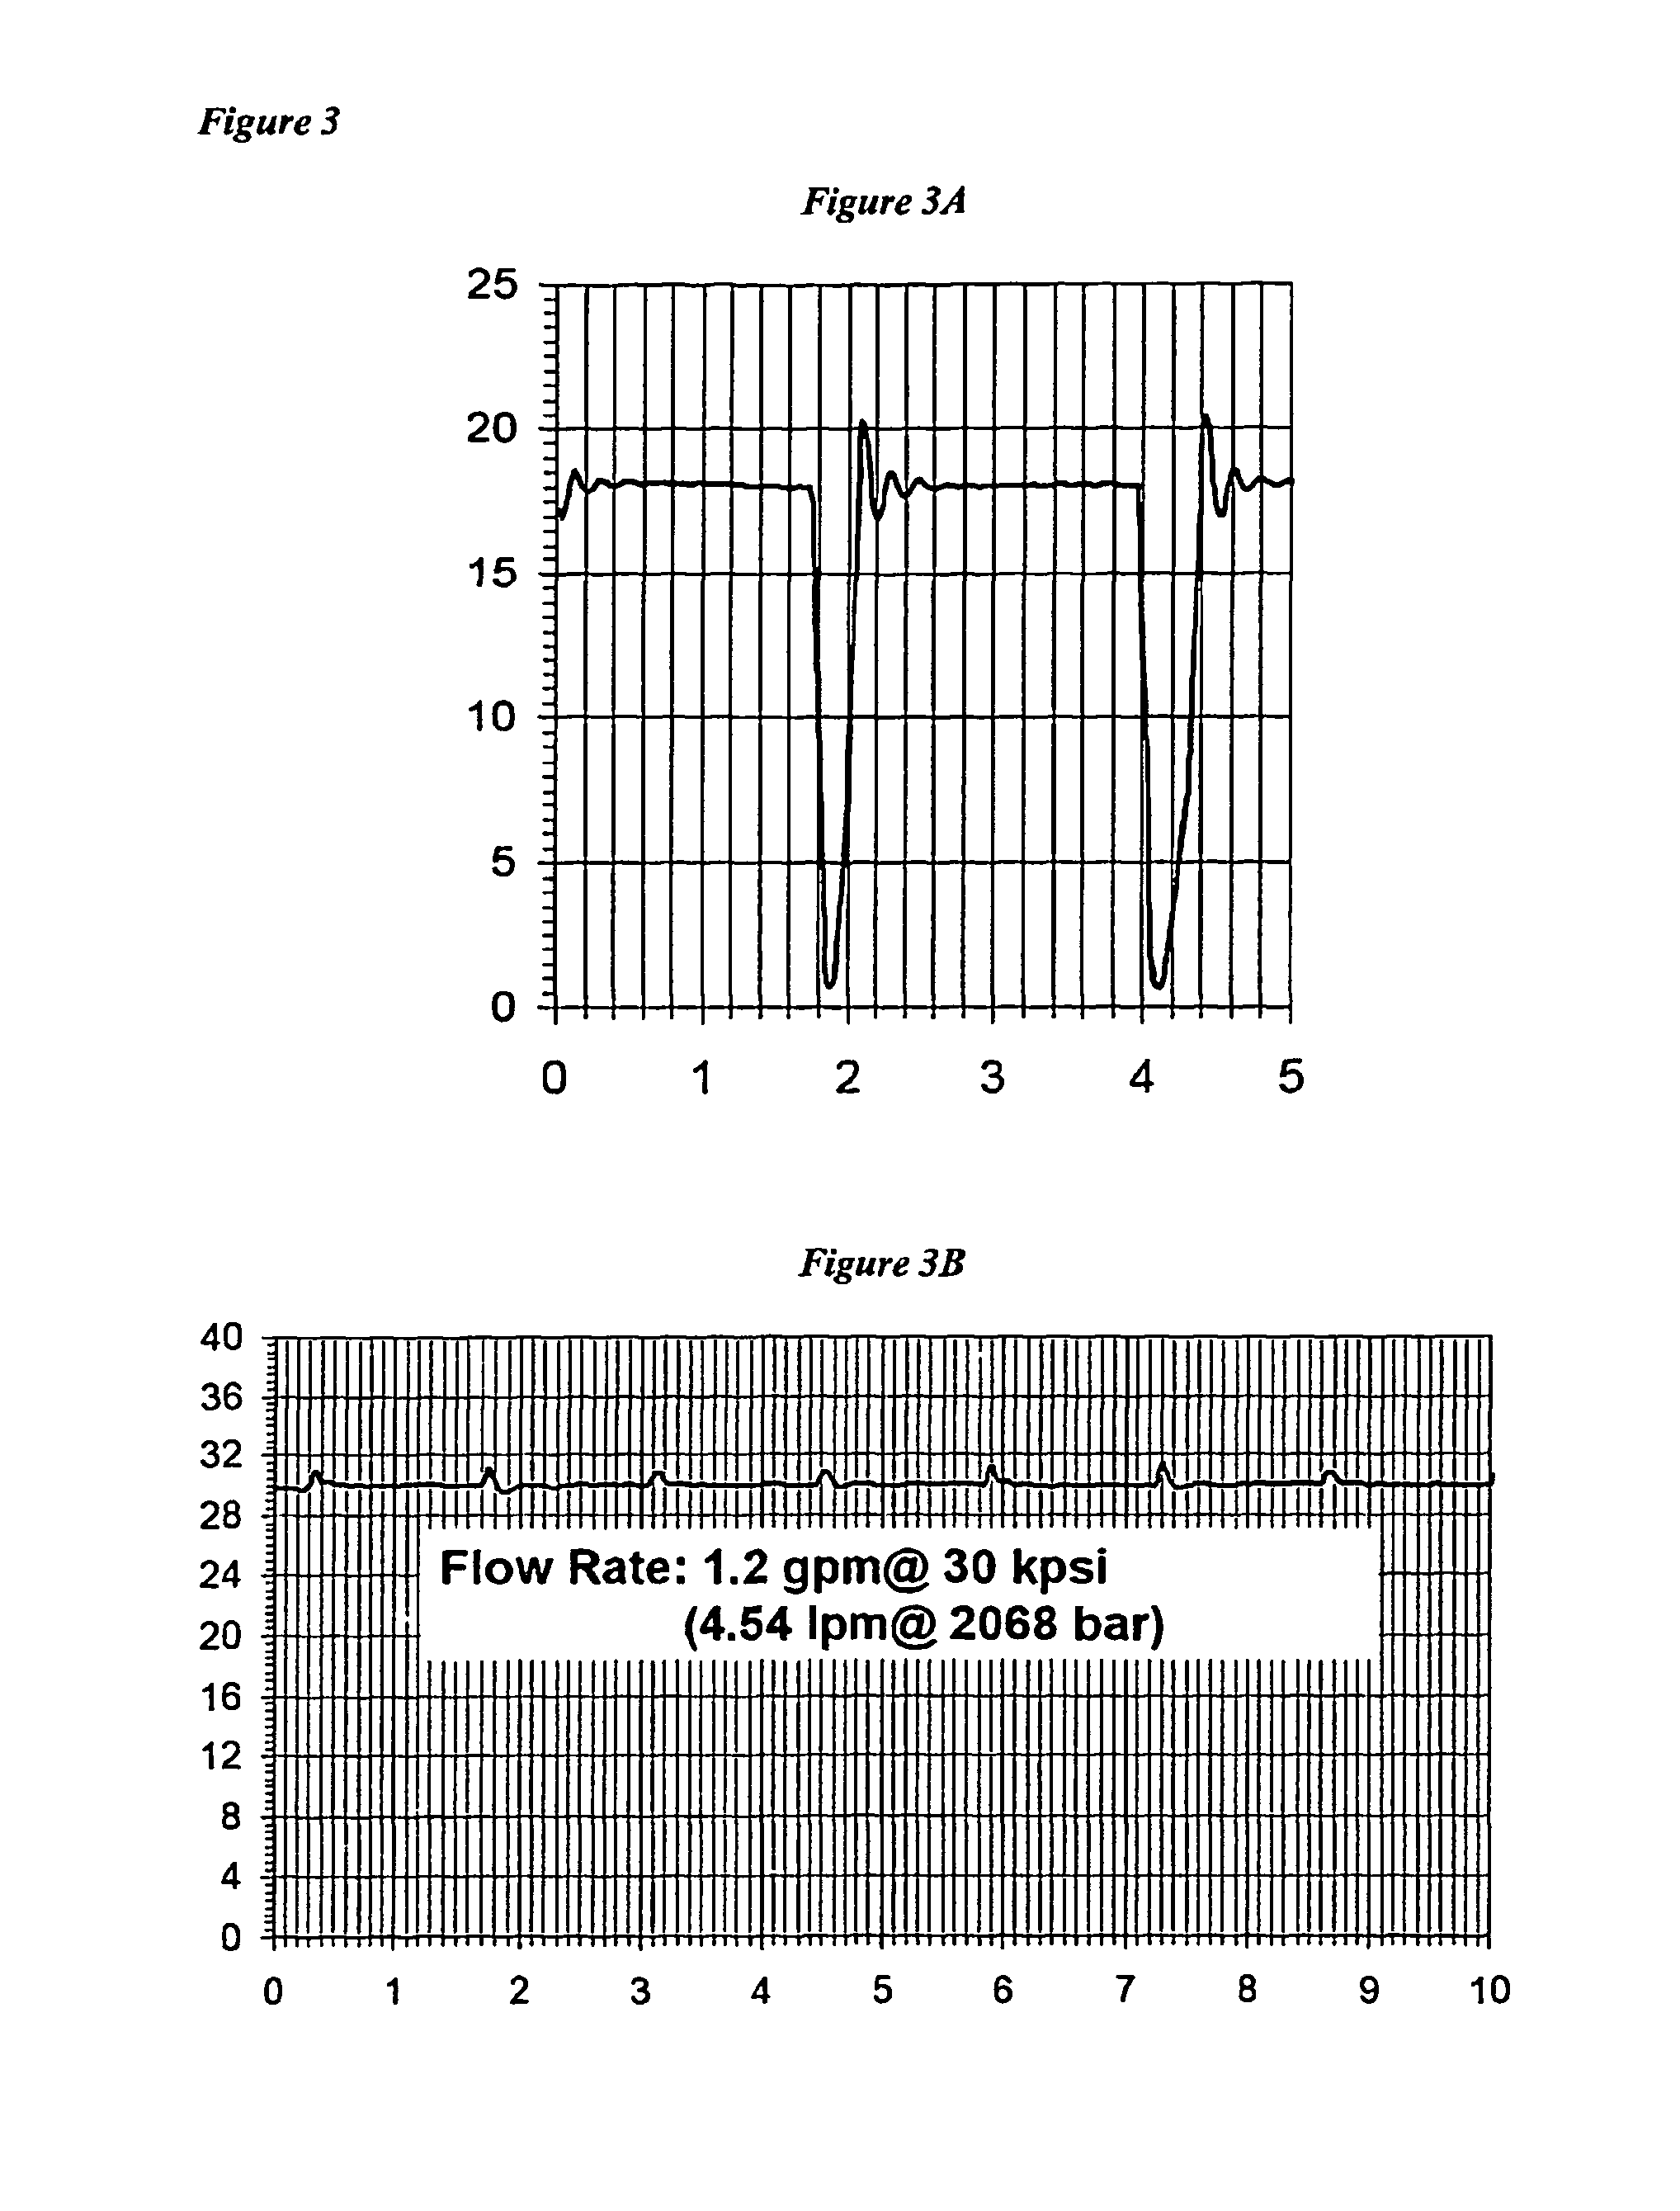 Arranging interaction and back pressure chambers for microfluidization